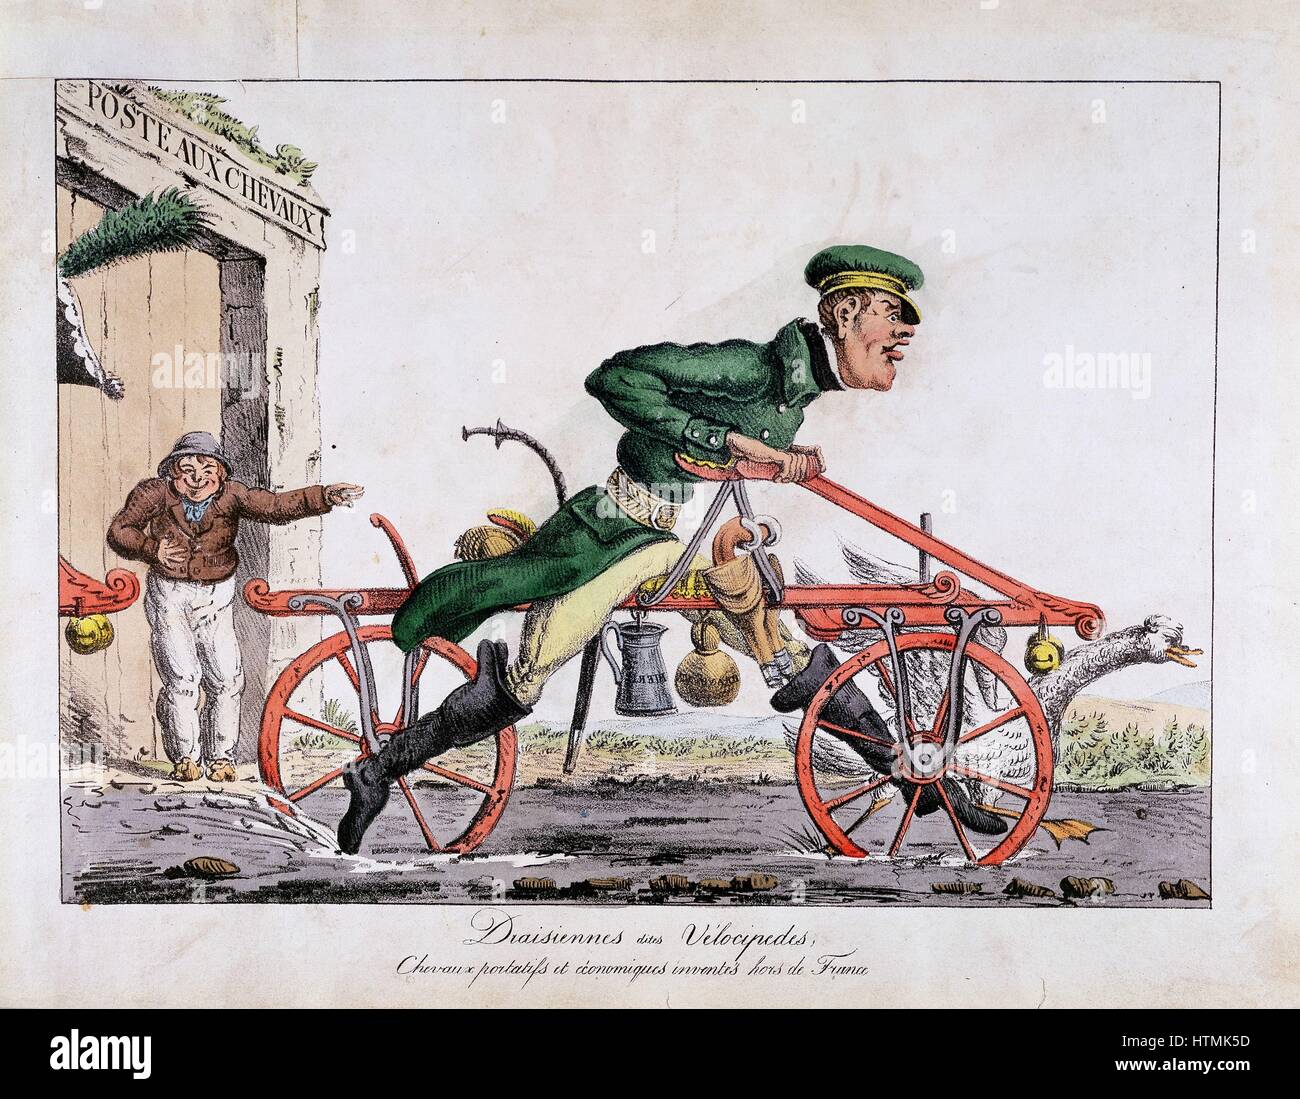 Draisien or Velocipede shown replacing horses in the French post service. Coloured lithograph cartoon, 1818 Stock Photo